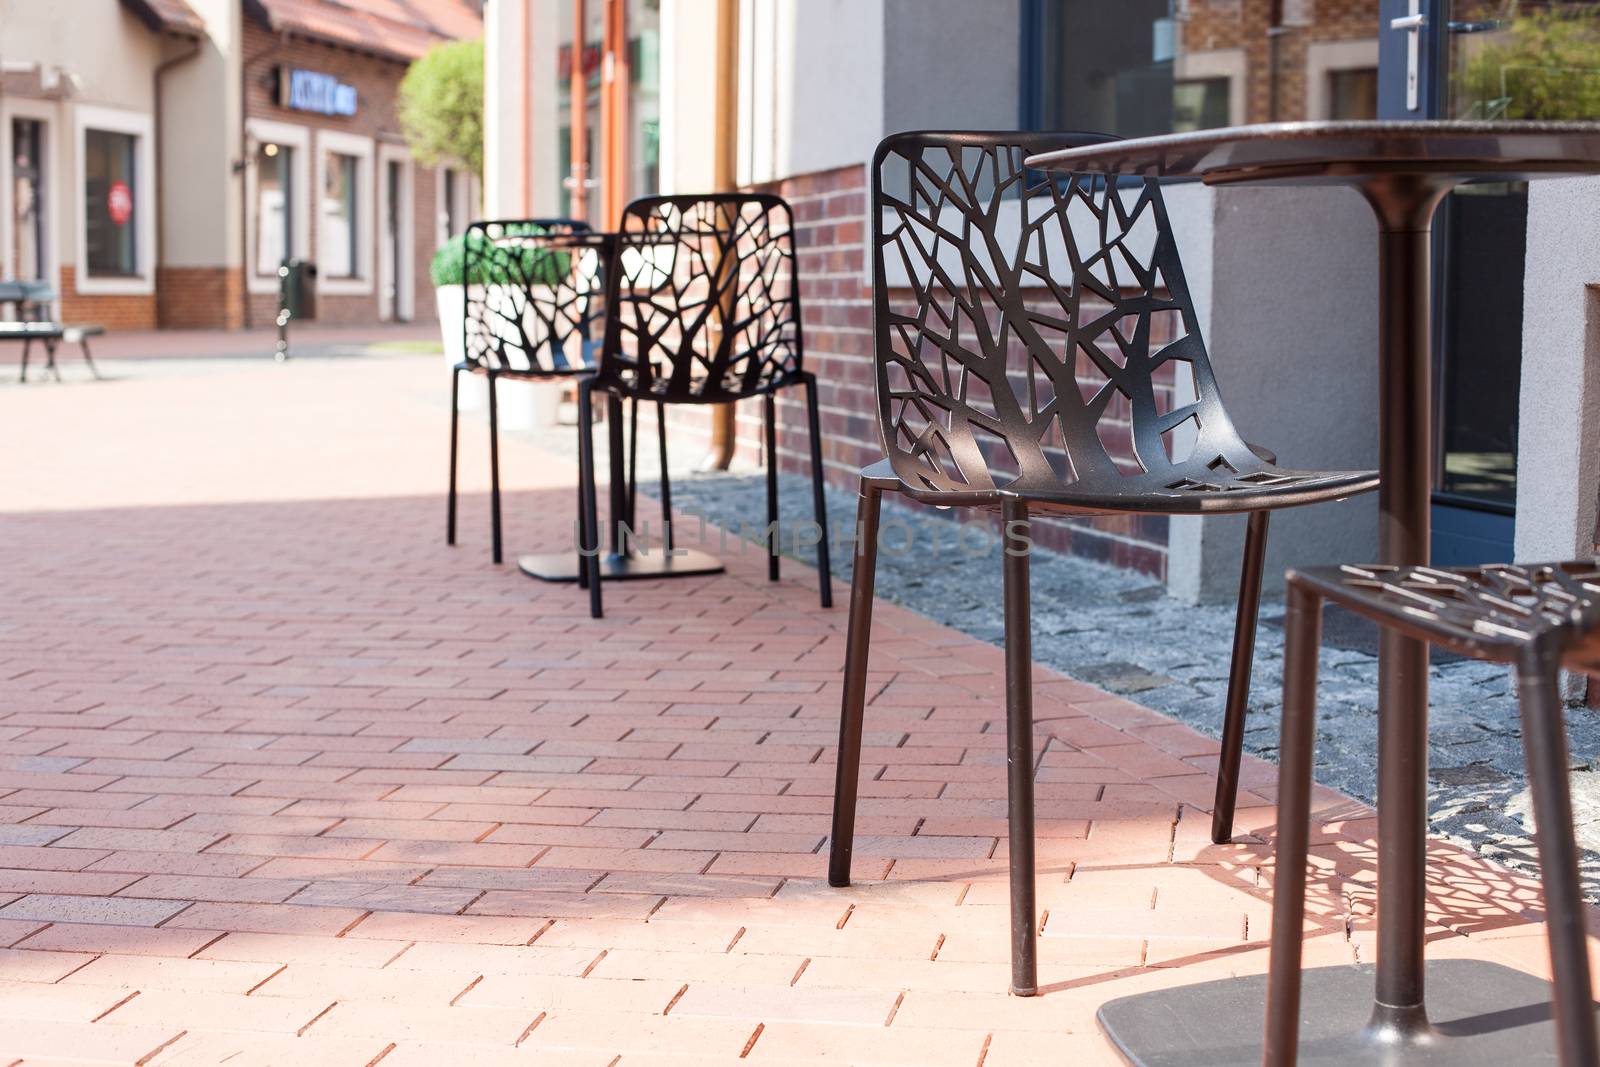 Modern carved chairs with trees on the street by Vanzyst